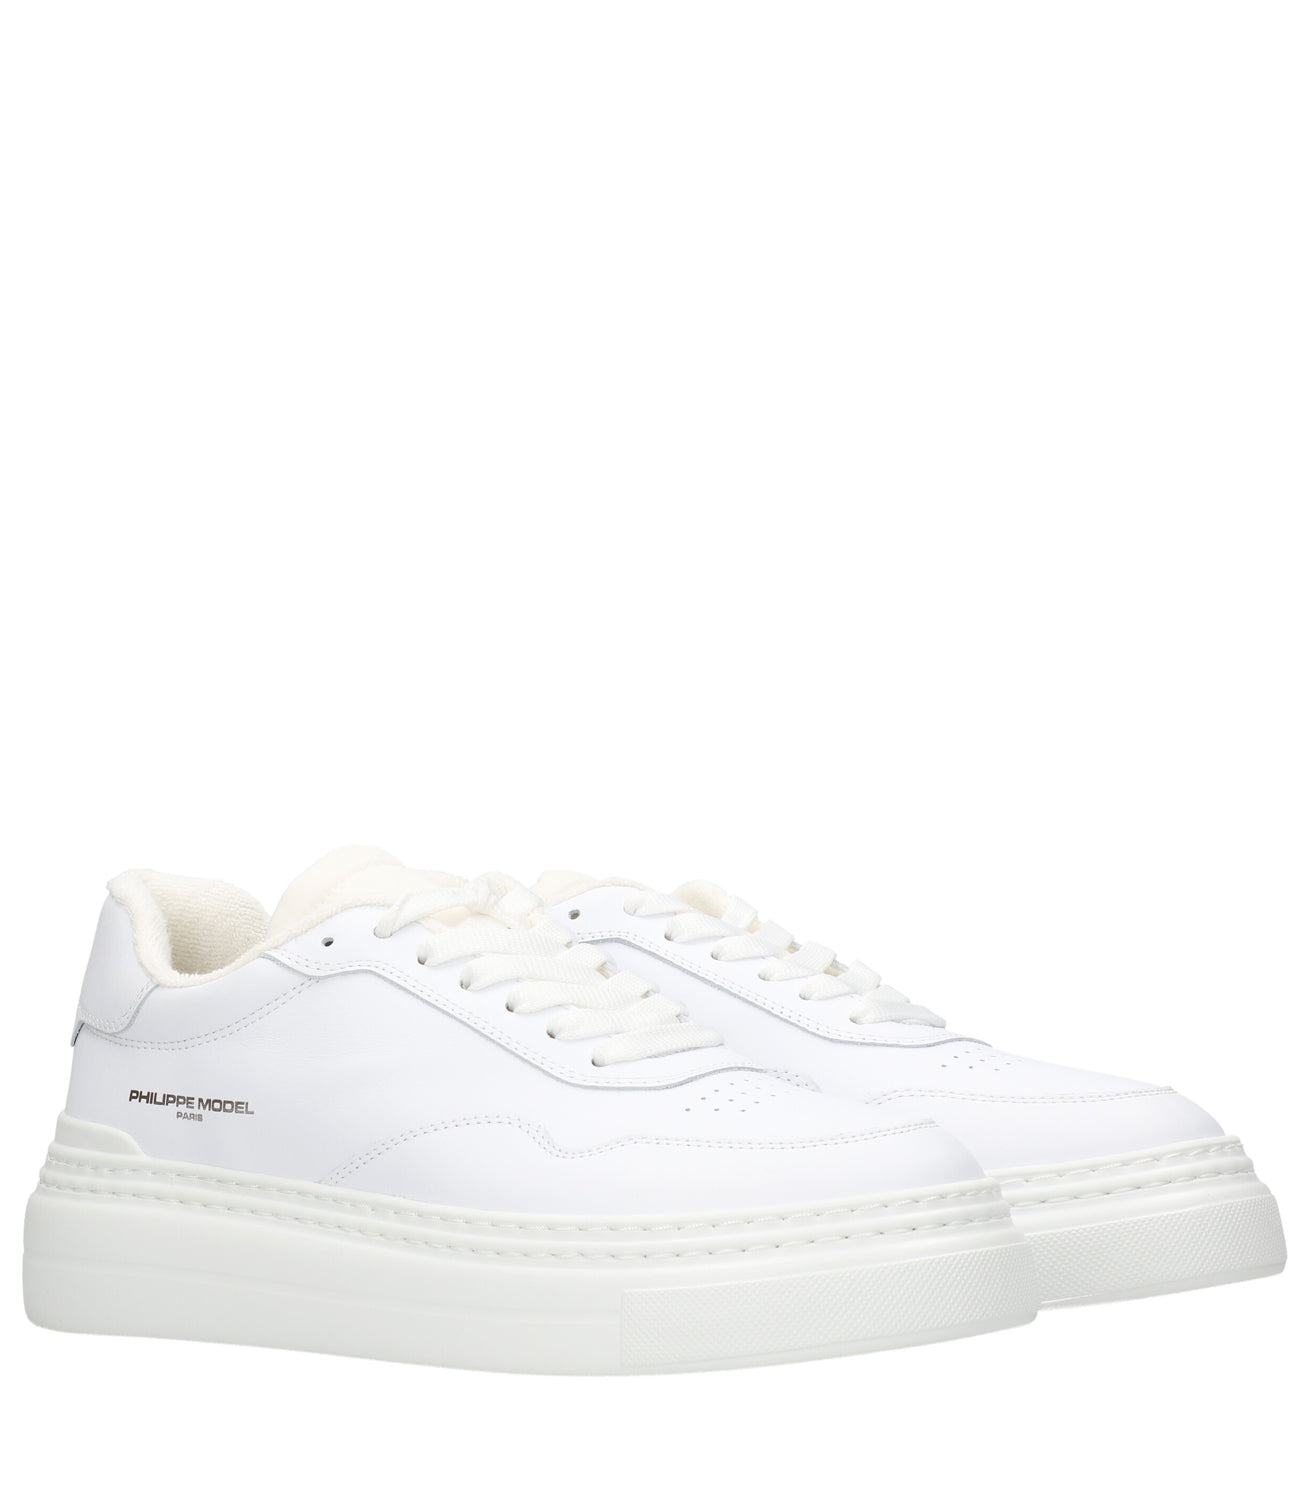 Philippe Model | Etienne Sneakers White